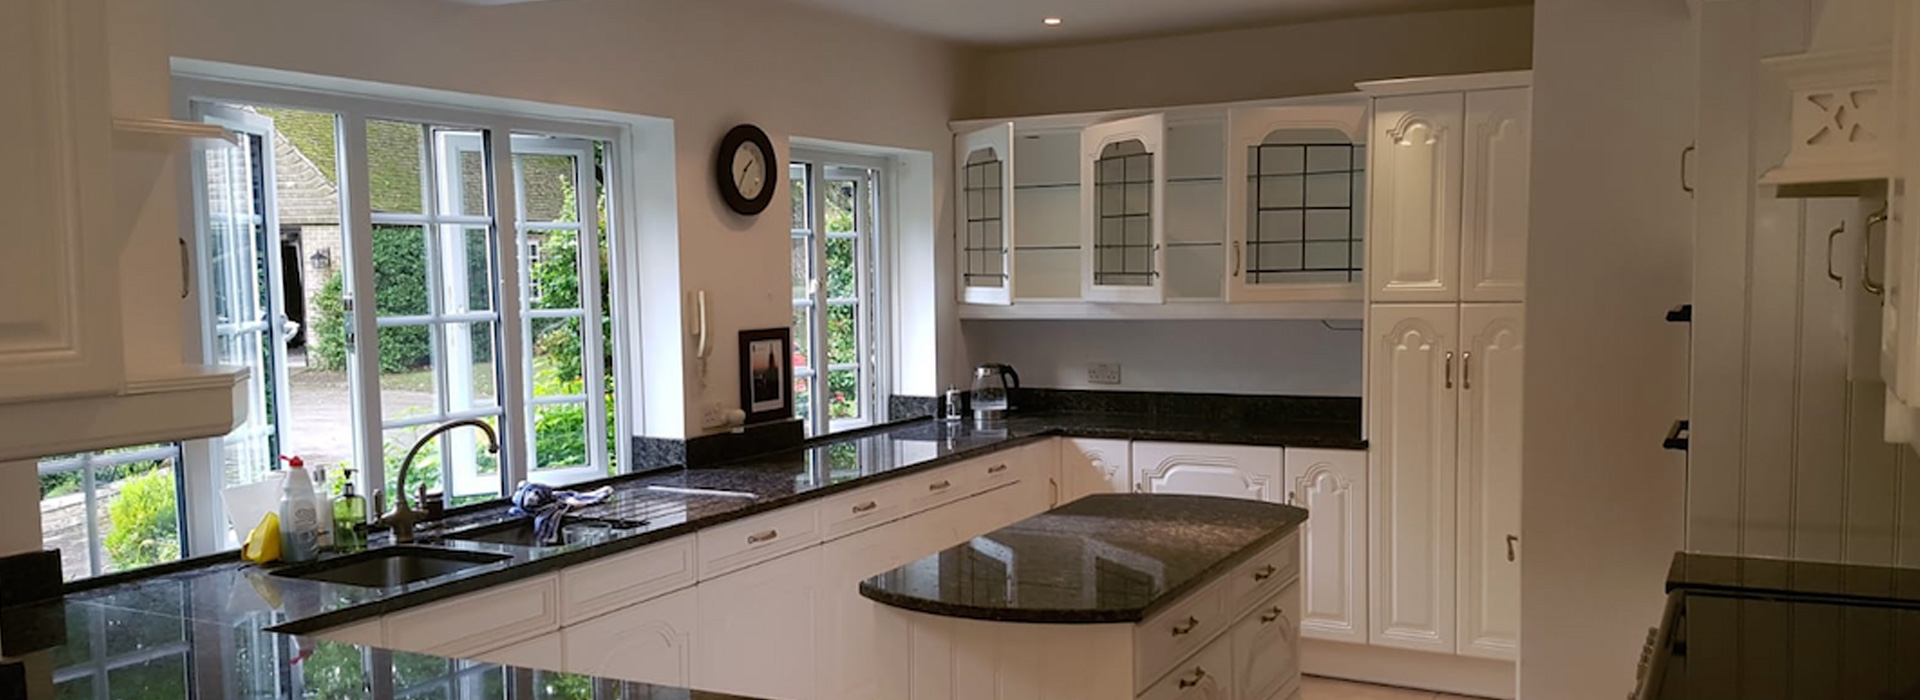 The Kitchen Respray Company - Specialists in bespoke & custom painted kitchen respraying and finishing